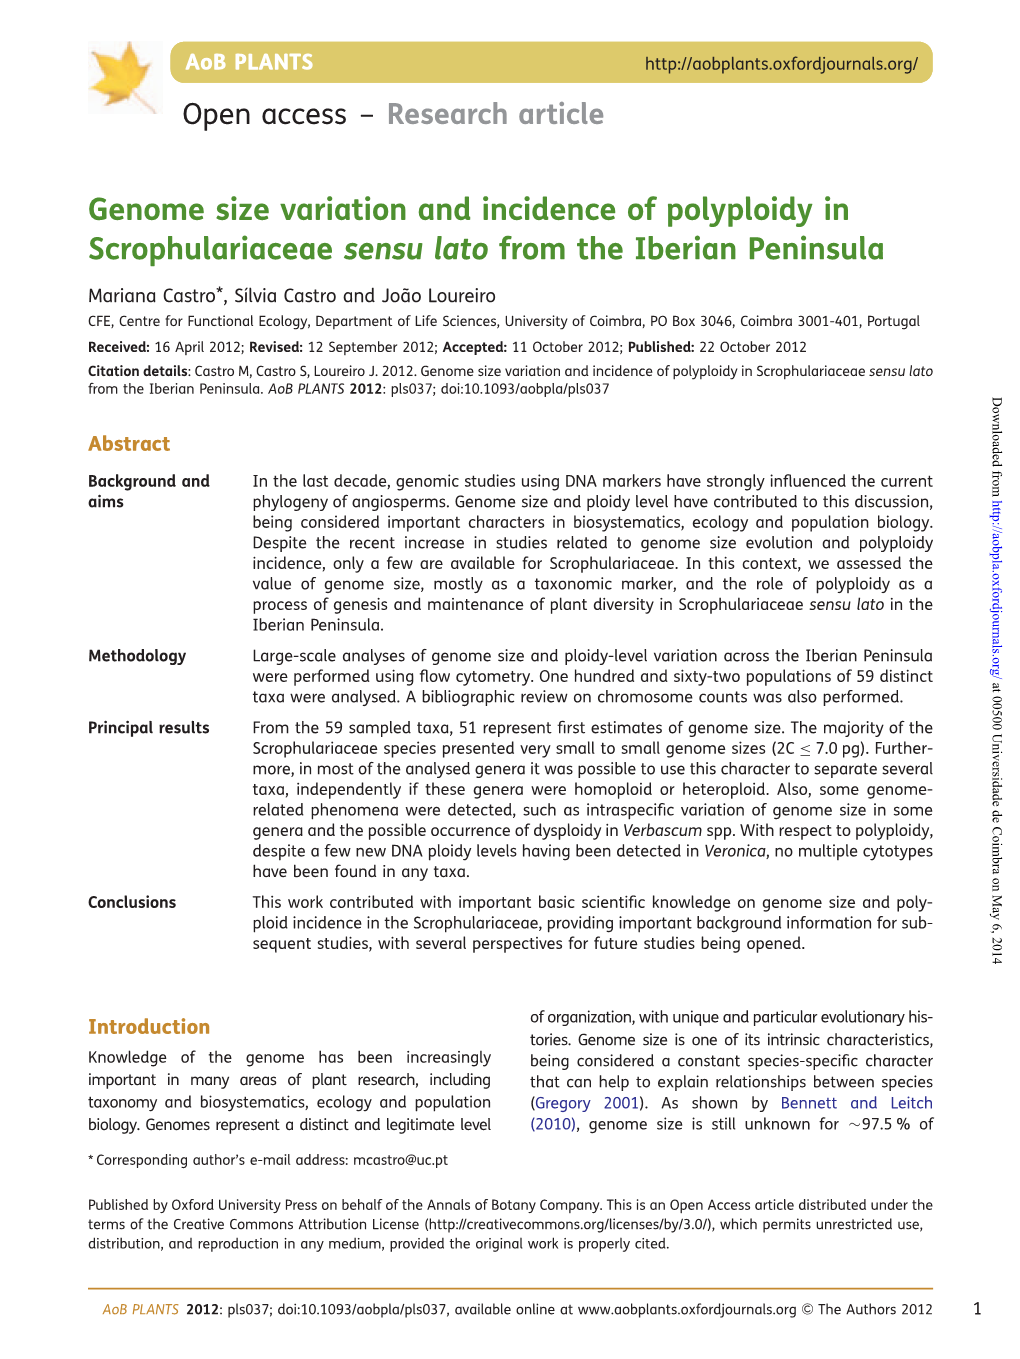 Genome Size Variation and Incidence of Polyploidy in Scrophulariaceae Sensu Lato from the Iberian Peninsula